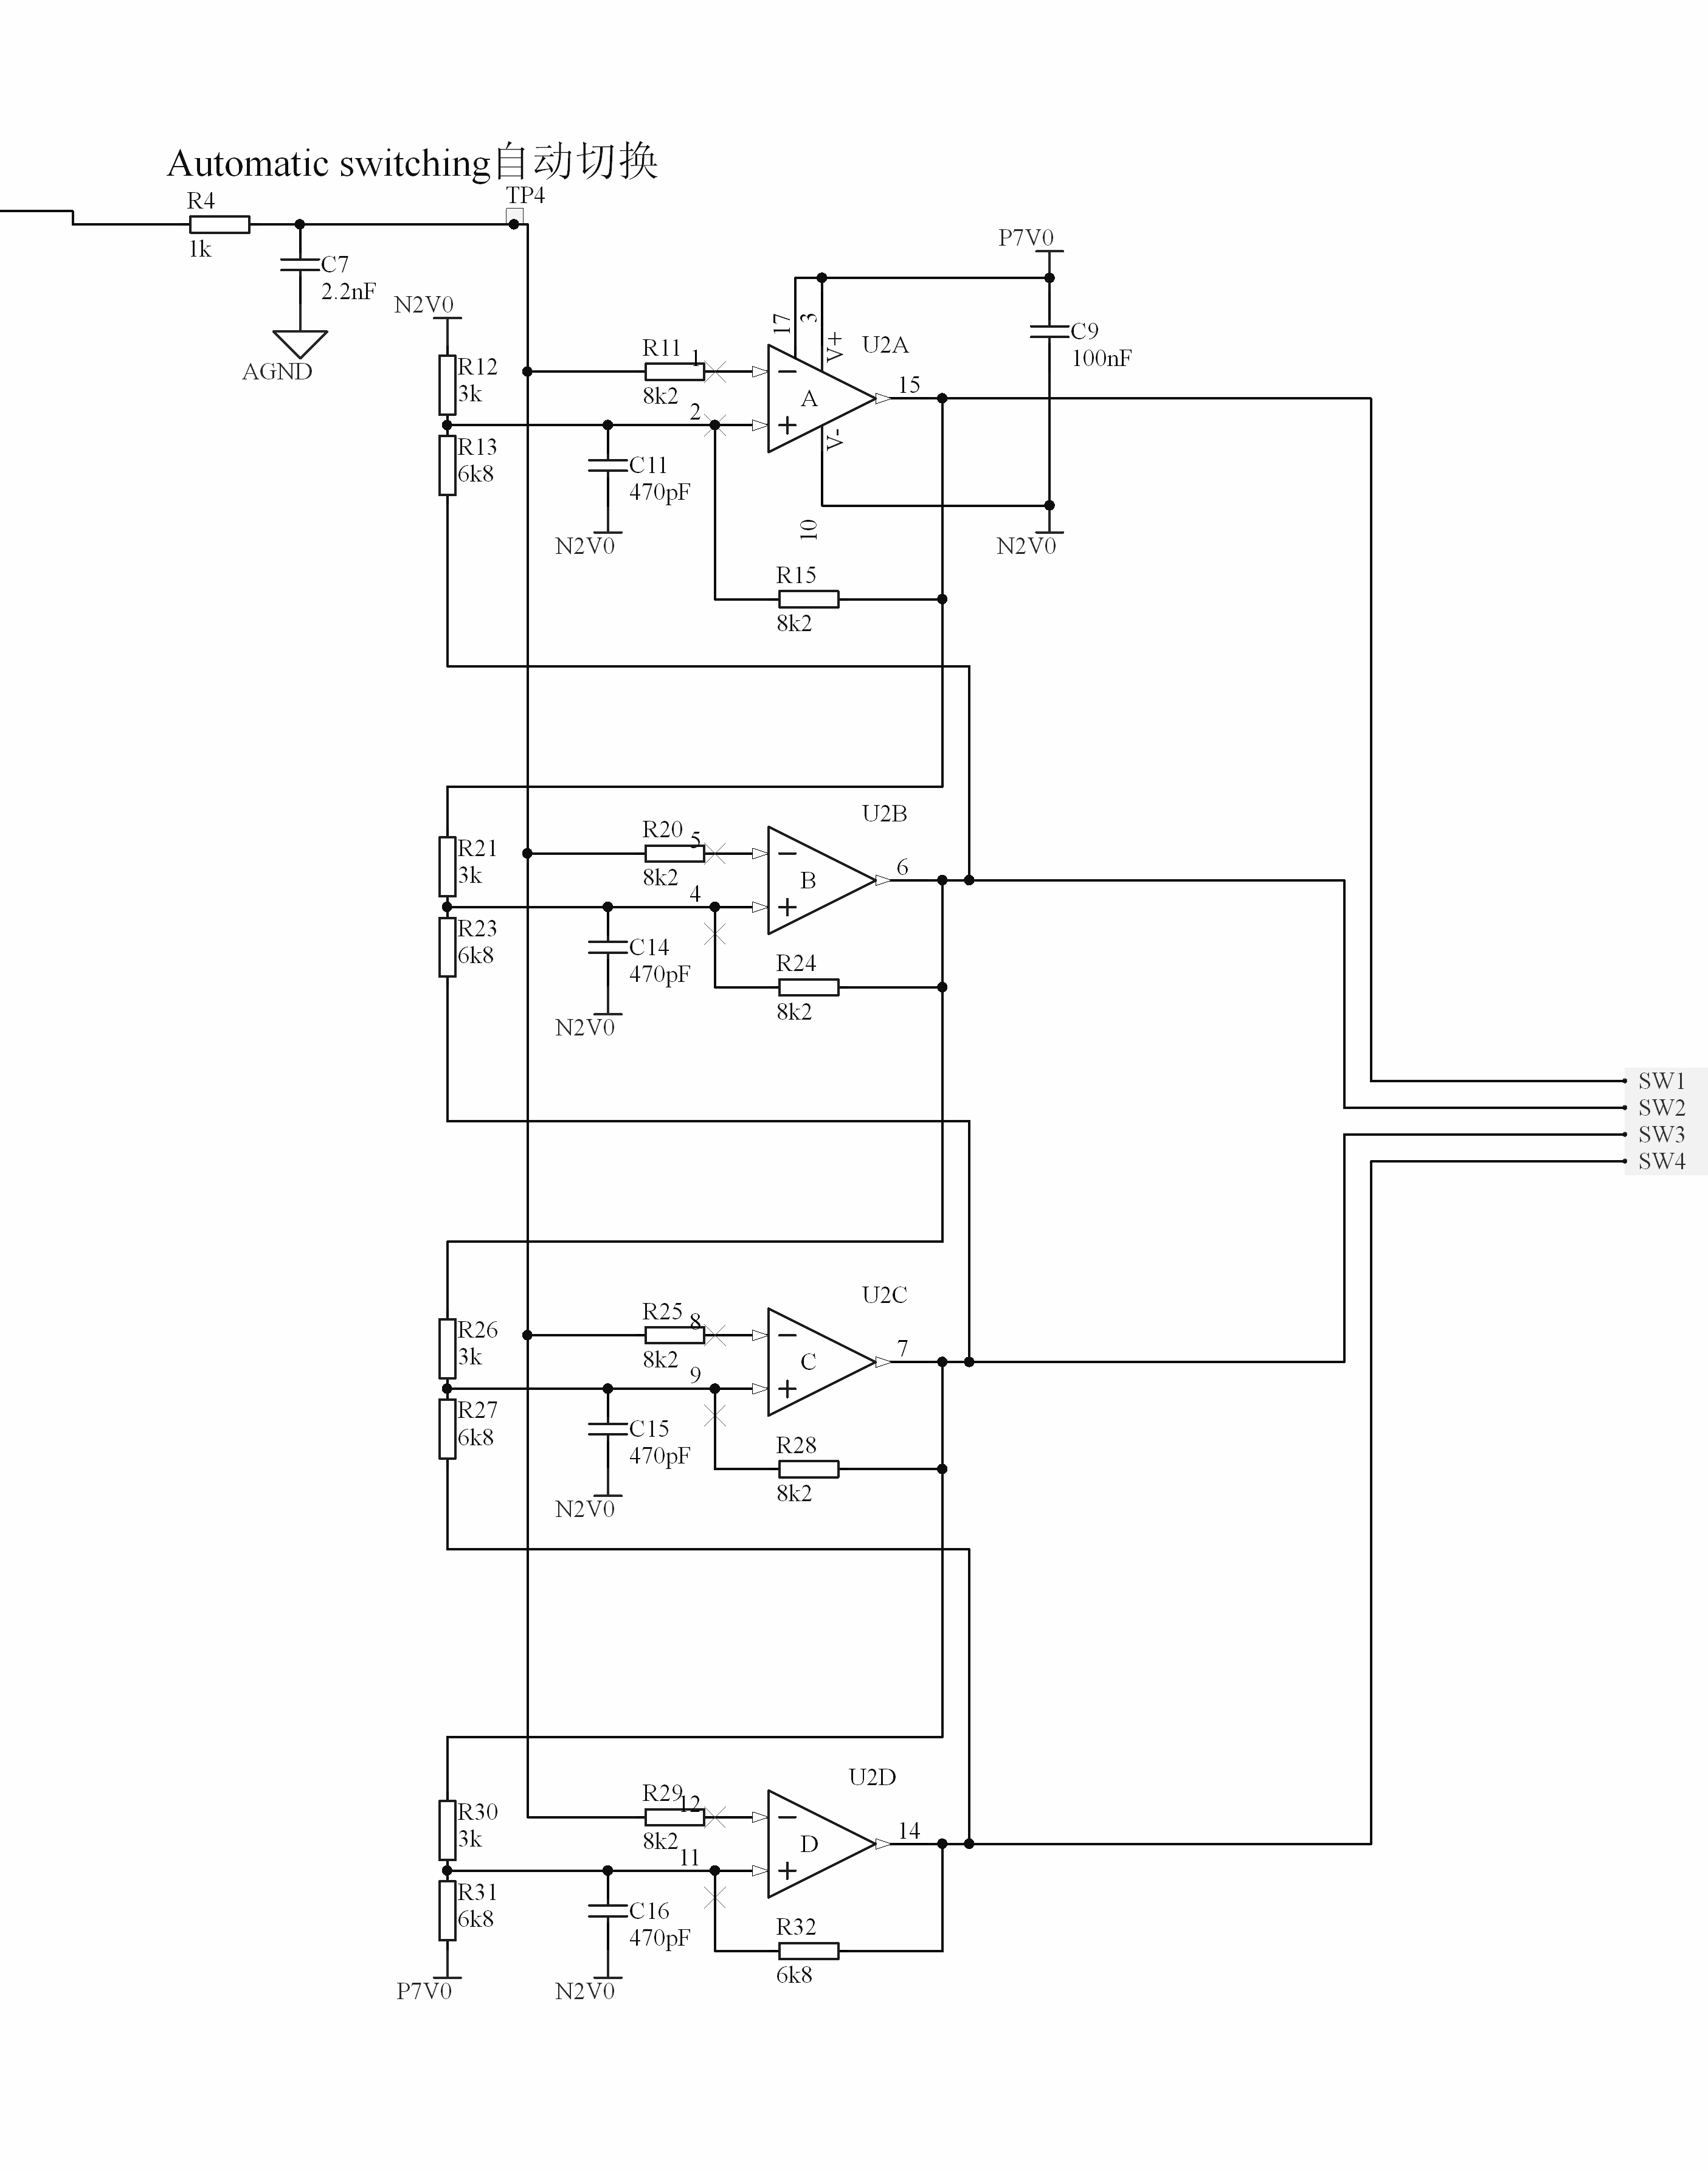 pca63100_current_automatic_switch.png